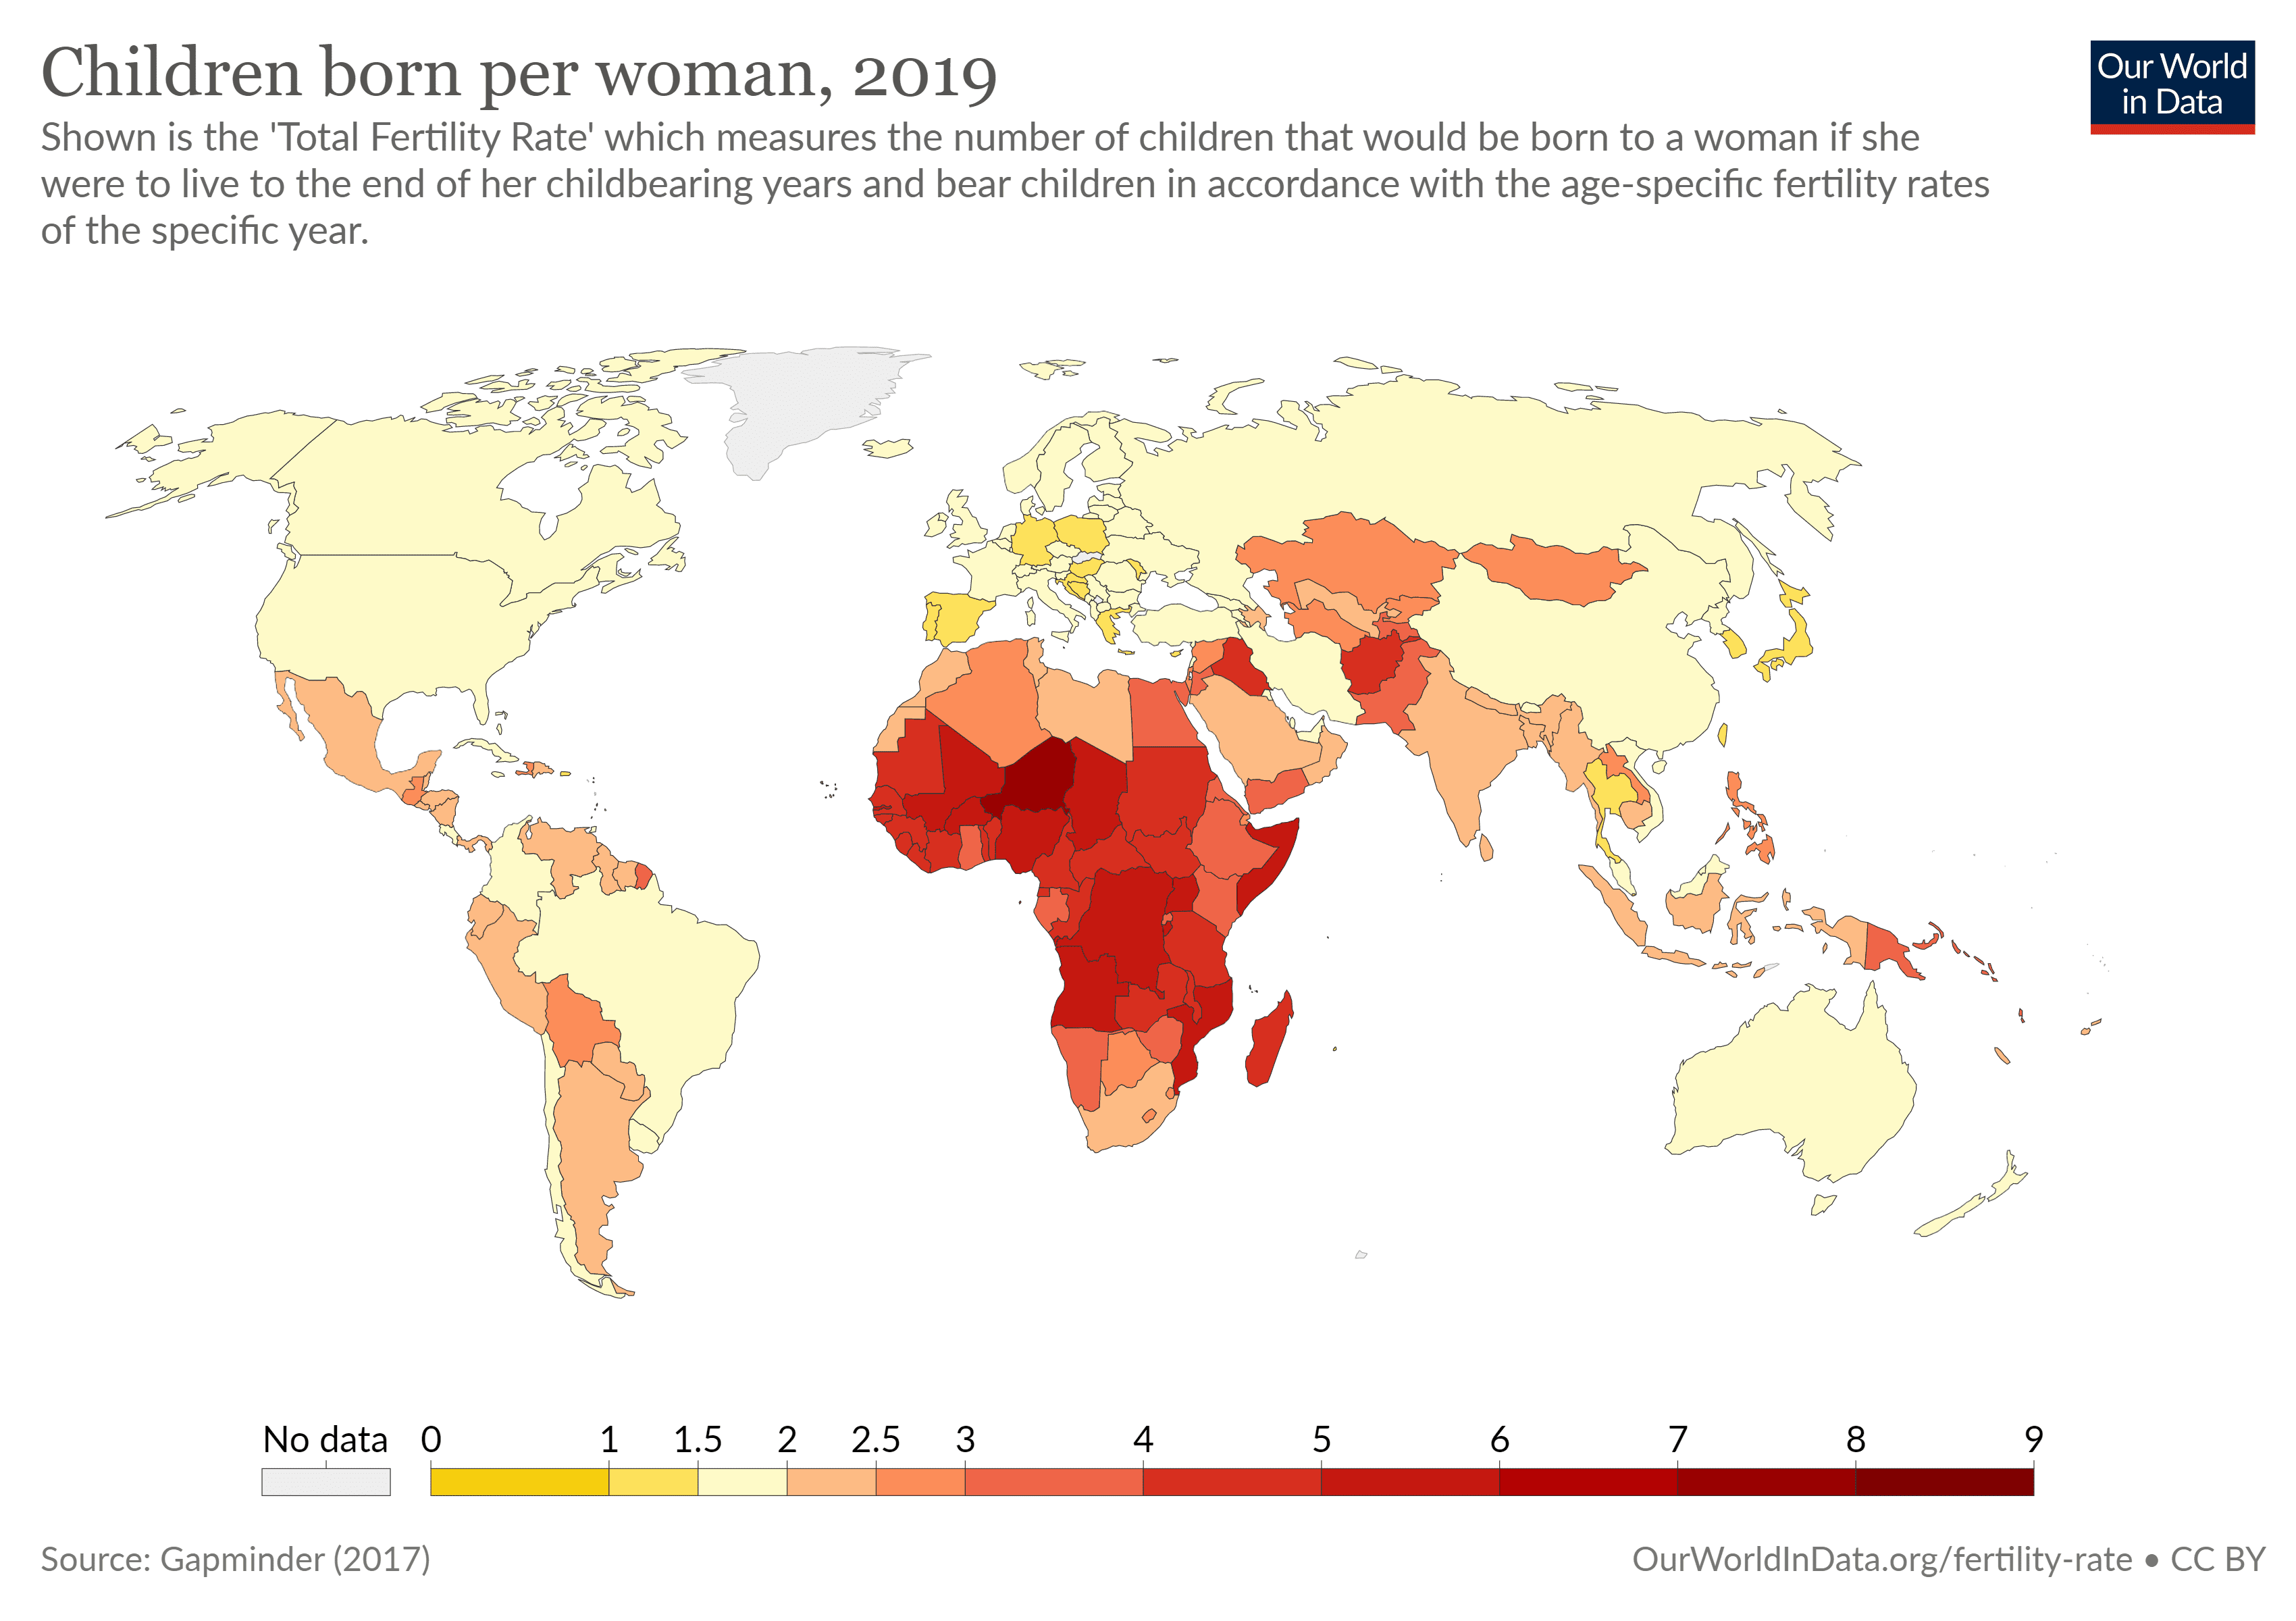 Global map of total fertility rate showing children born per woman in 2019